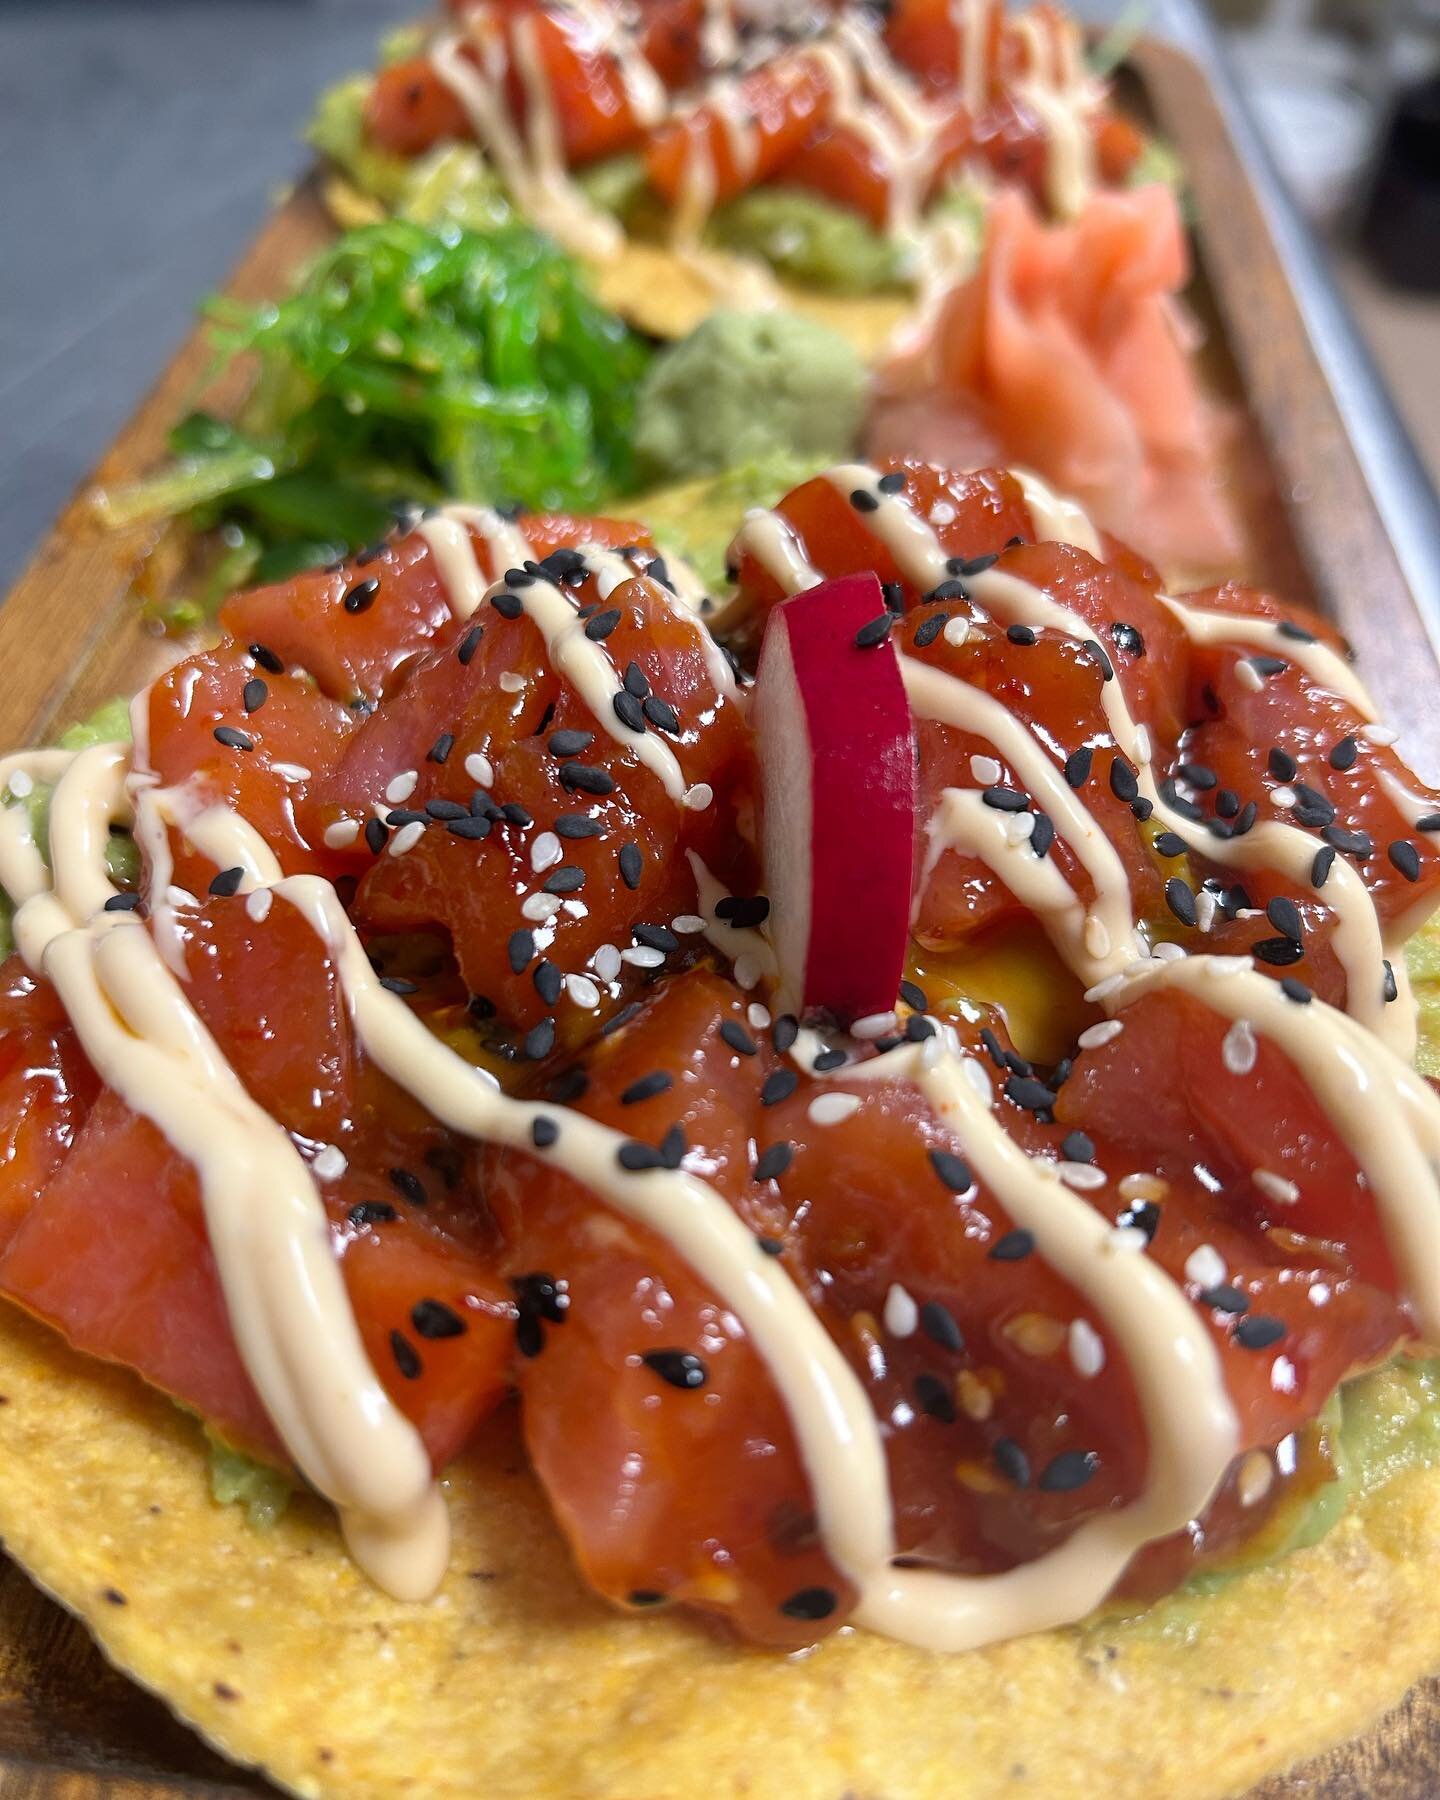 Have you tried our Tuna Tower yet?!
Spicy tuna, avocado, scallion and sesame on Masago Tostadas!
Come and get yours!
😋